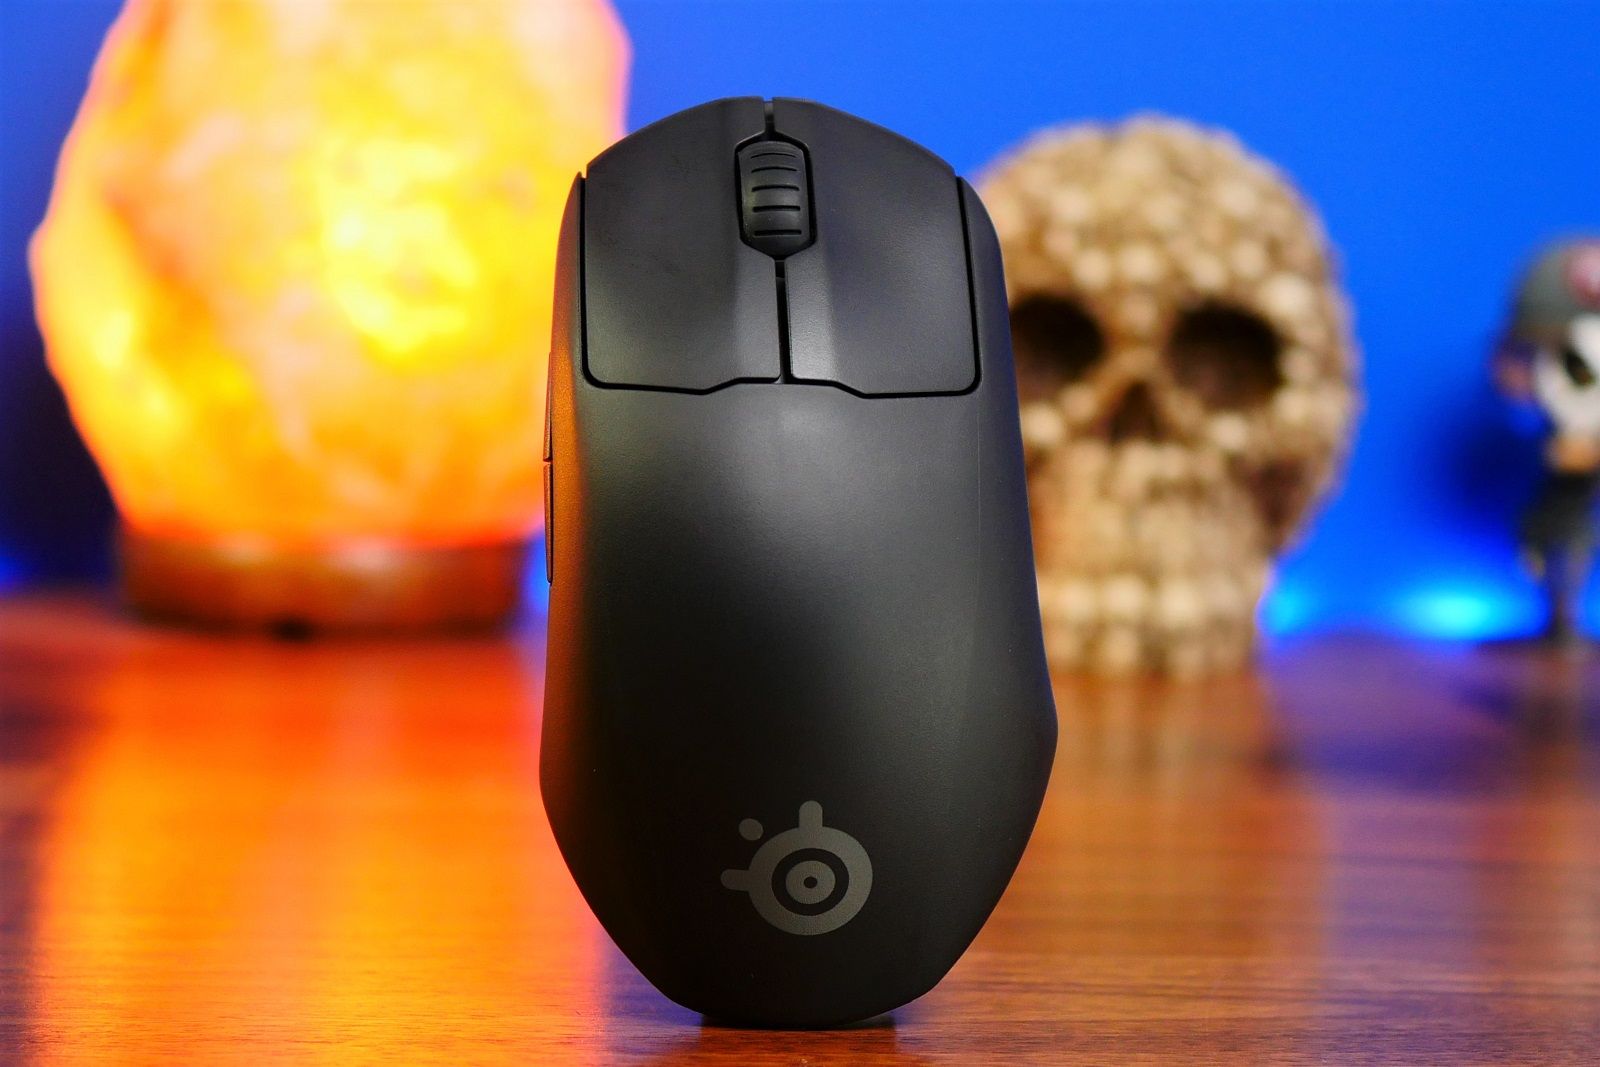 SteelSeries Prime Wireless gaming mouse review profiles photo 2